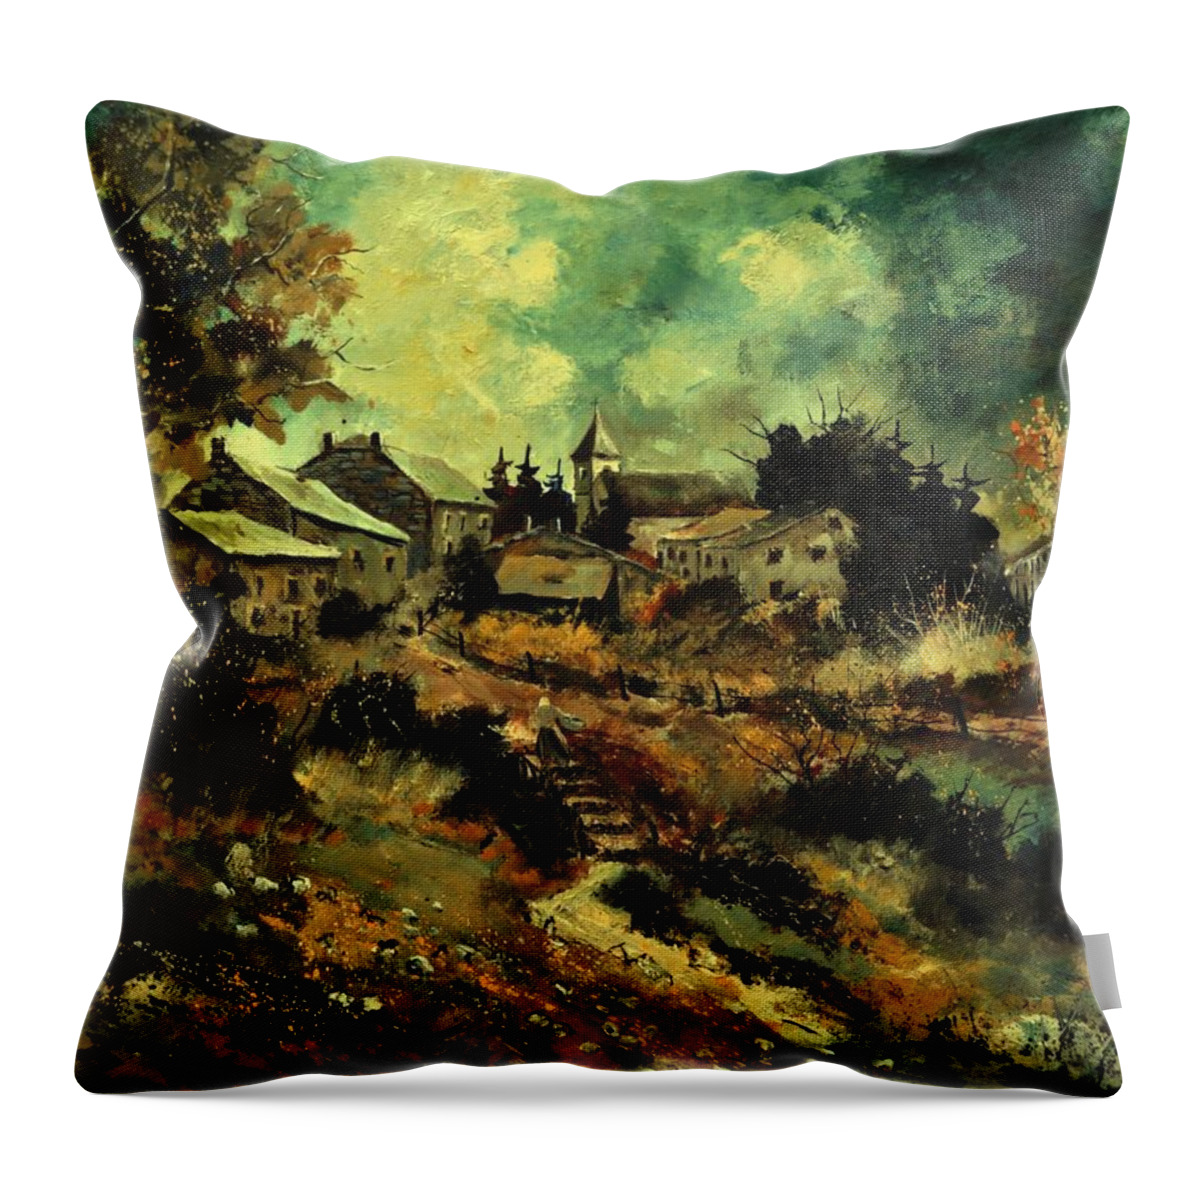 Landscape Throw Pillow featuring the painting Houdremont by Pol Ledent